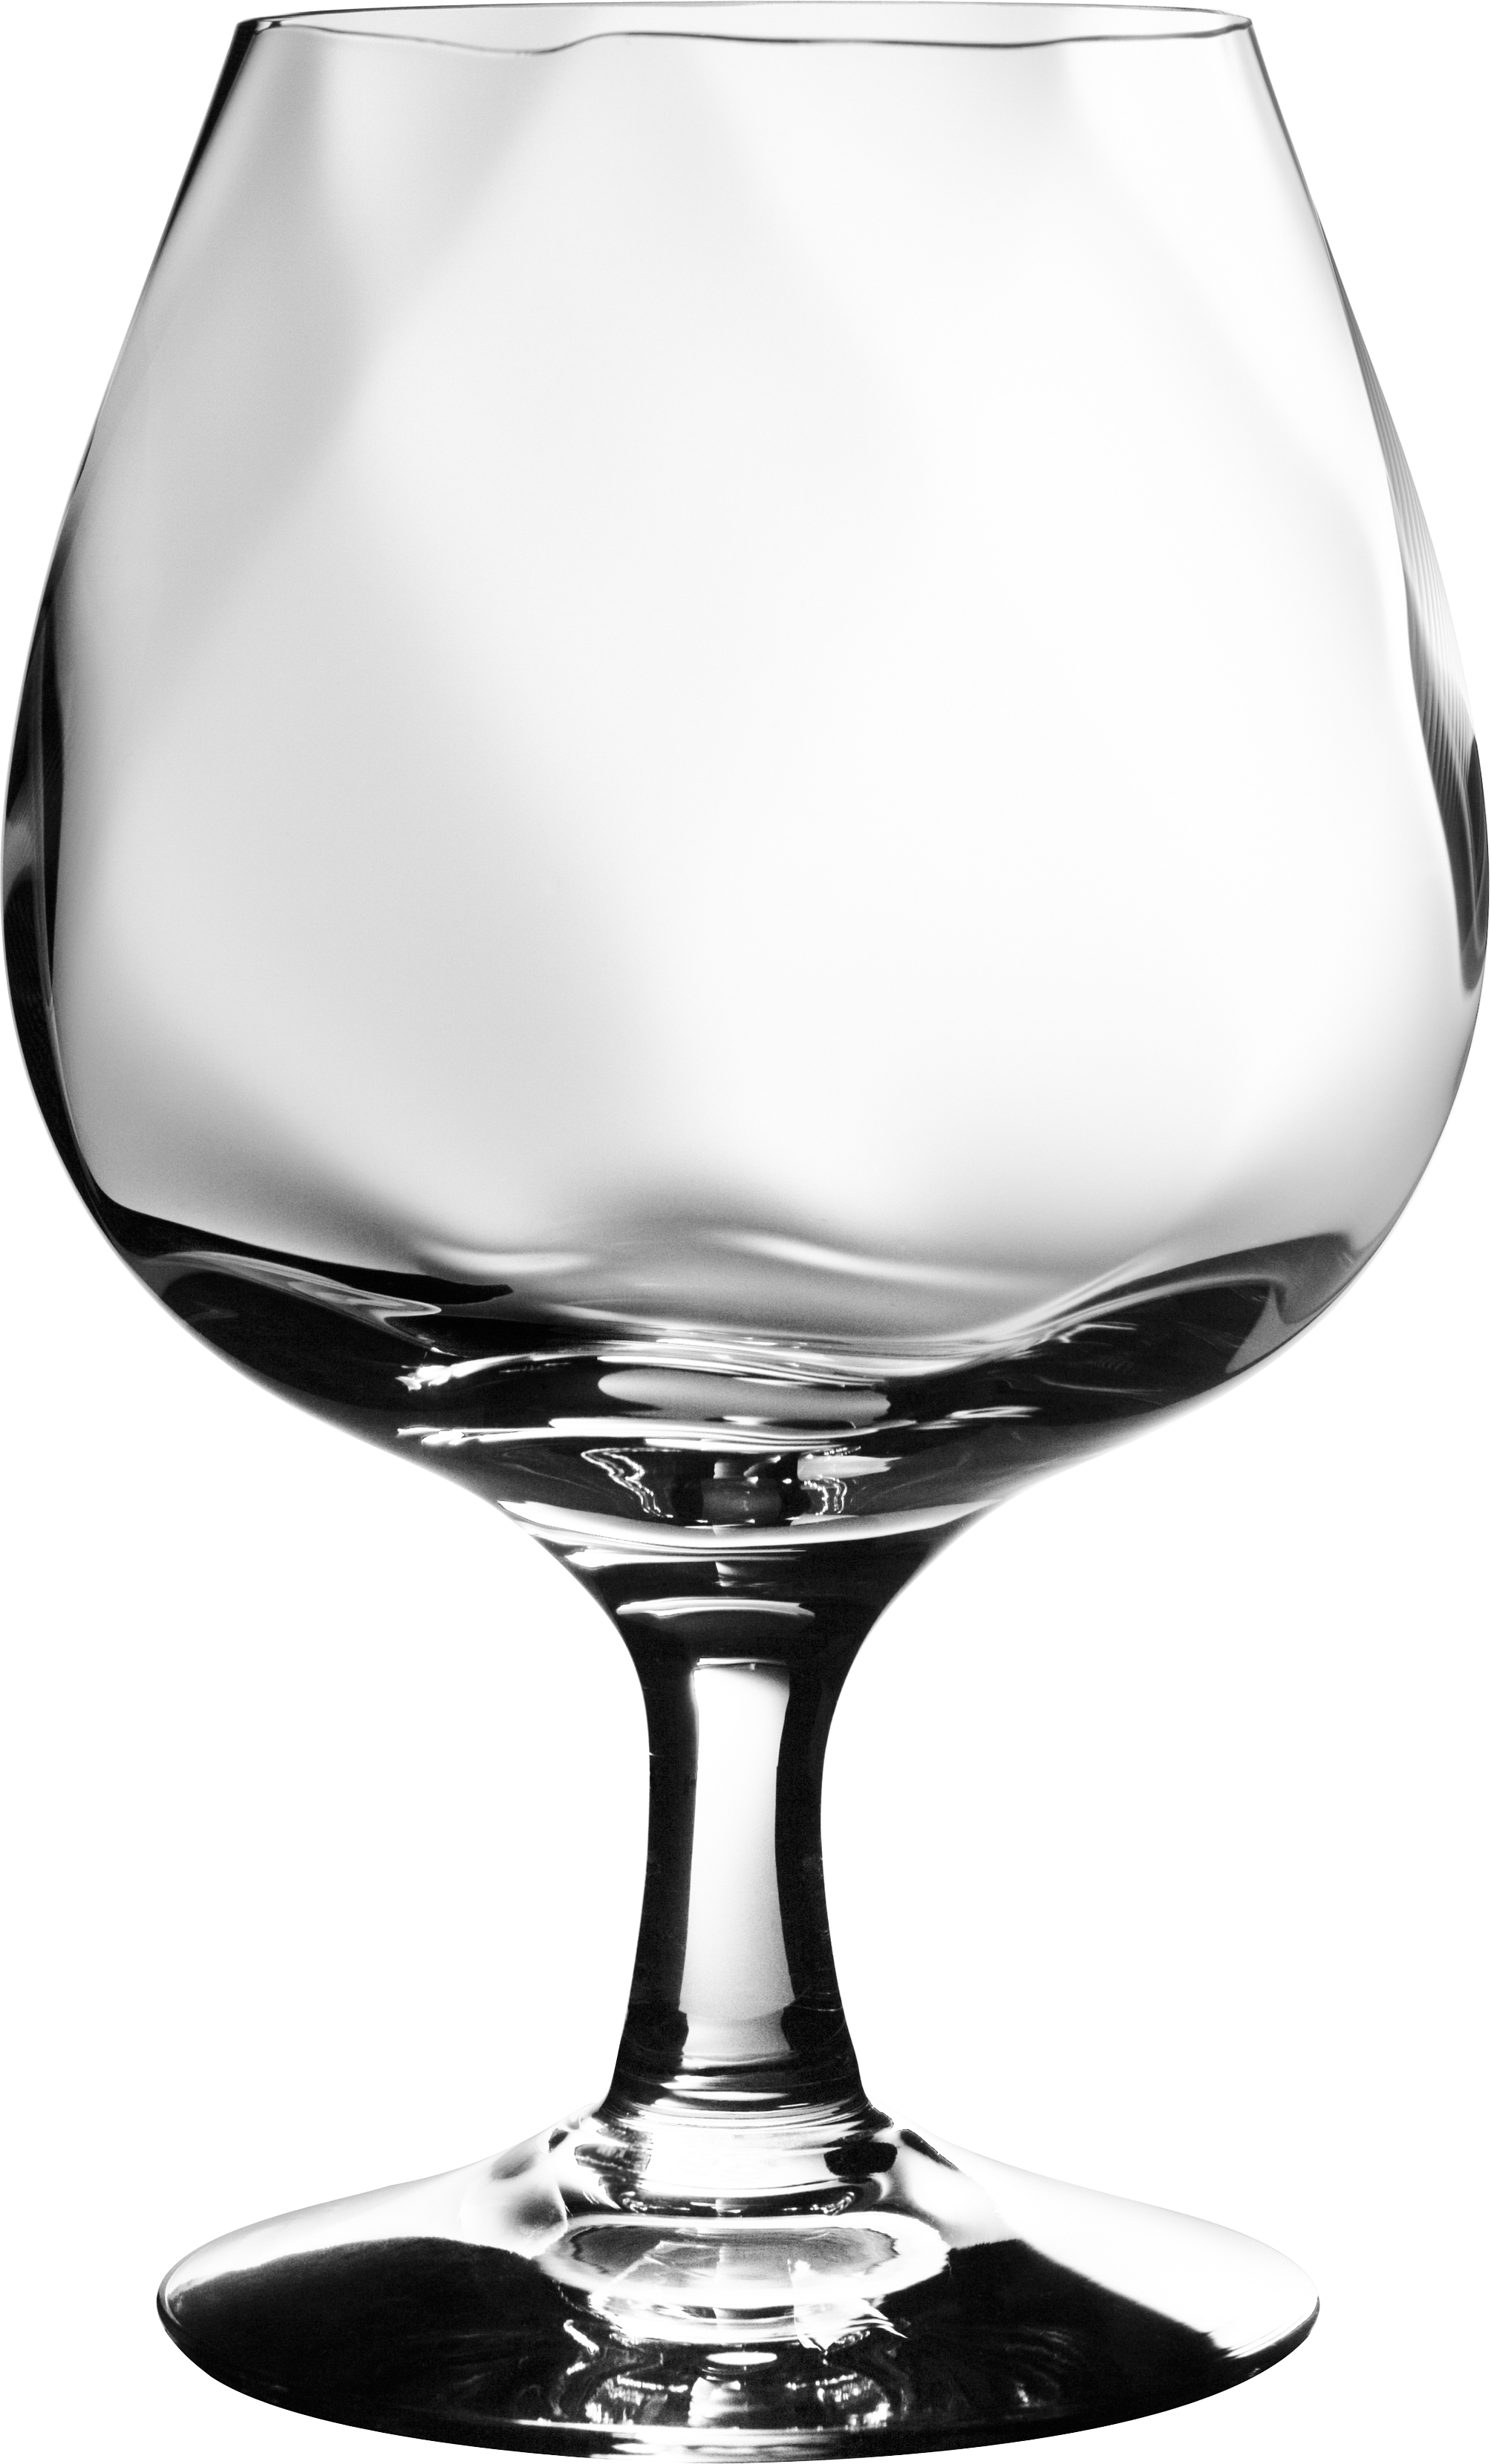 Drinking Glass Png Transparent Image - Glass, Transparent background PNG HD thumbnail